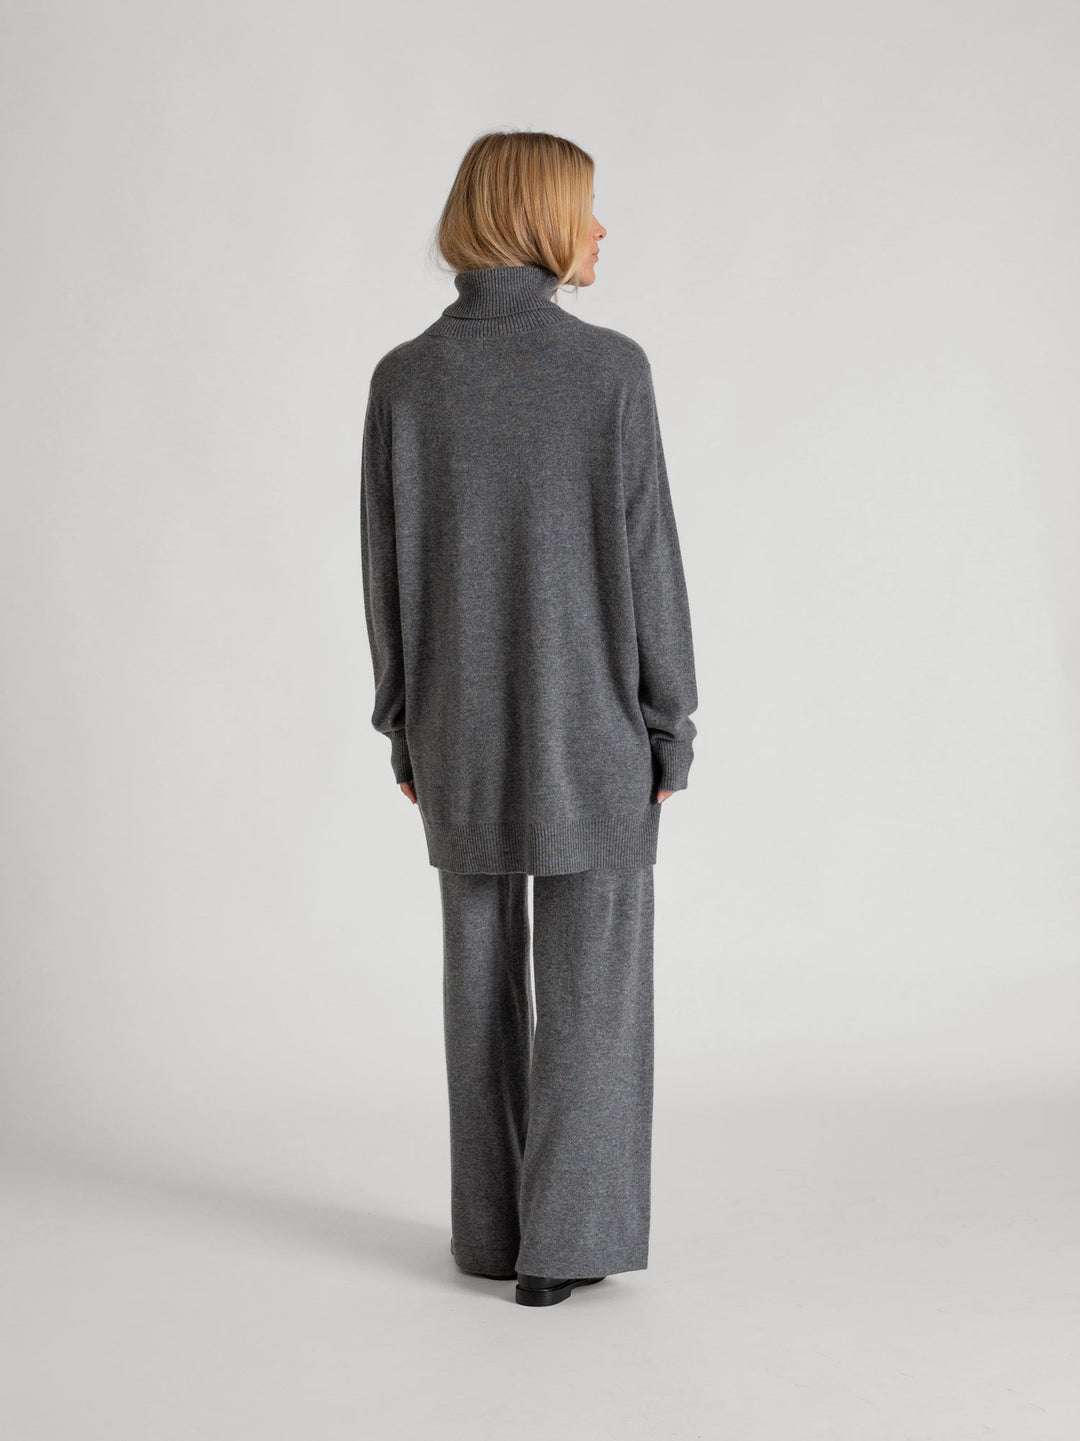 Long polo sweater in 100% pure cashmere. Scandinavian design by Kashmina. Color: Dark Grey.